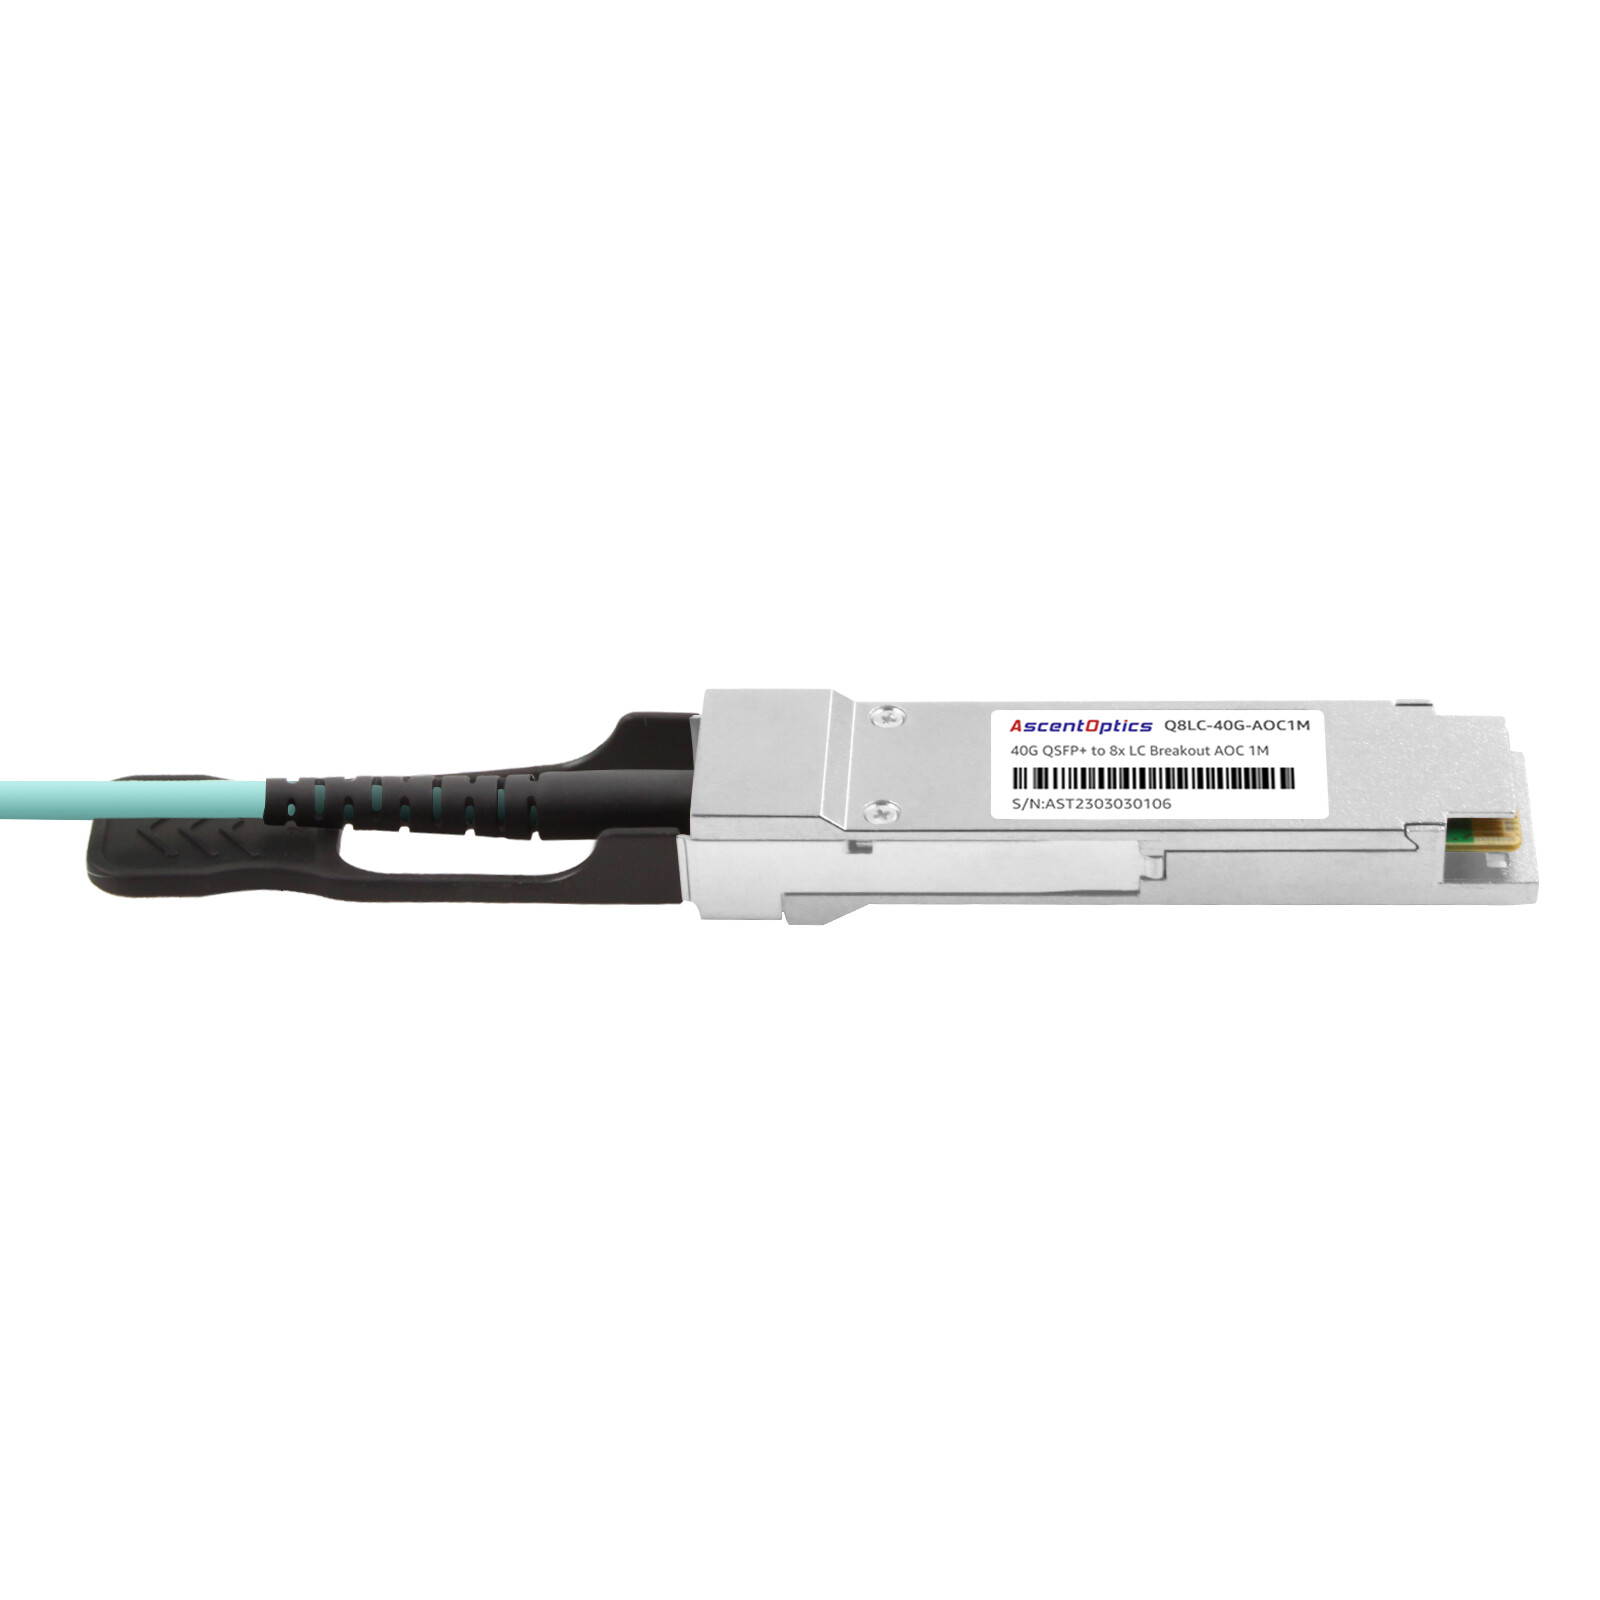 40G QSFP+ to 8x LC Breakout AOC Cable,xx Meter